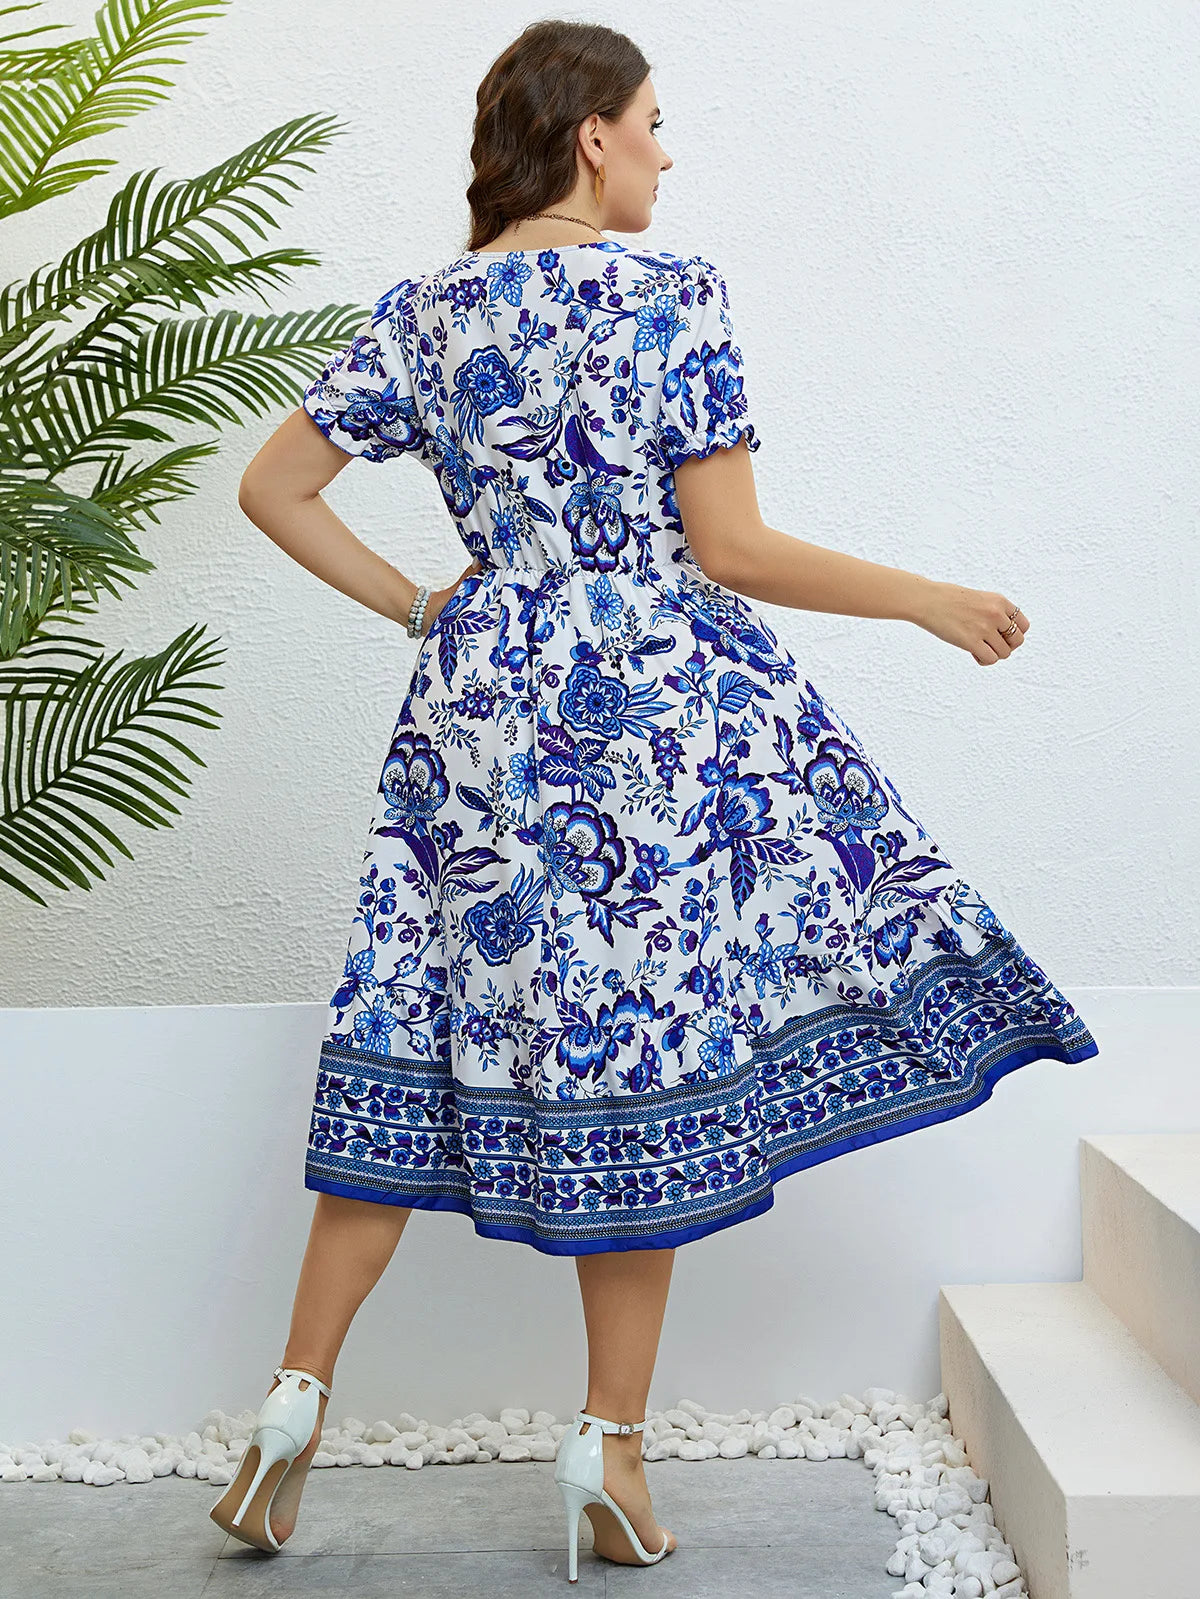 Plus Size Women Flower Print V-Neck A-Line Dresses Elegant Ruffle Short Sleeves Party Robe Casual Lady Vacation Large Size Cloth